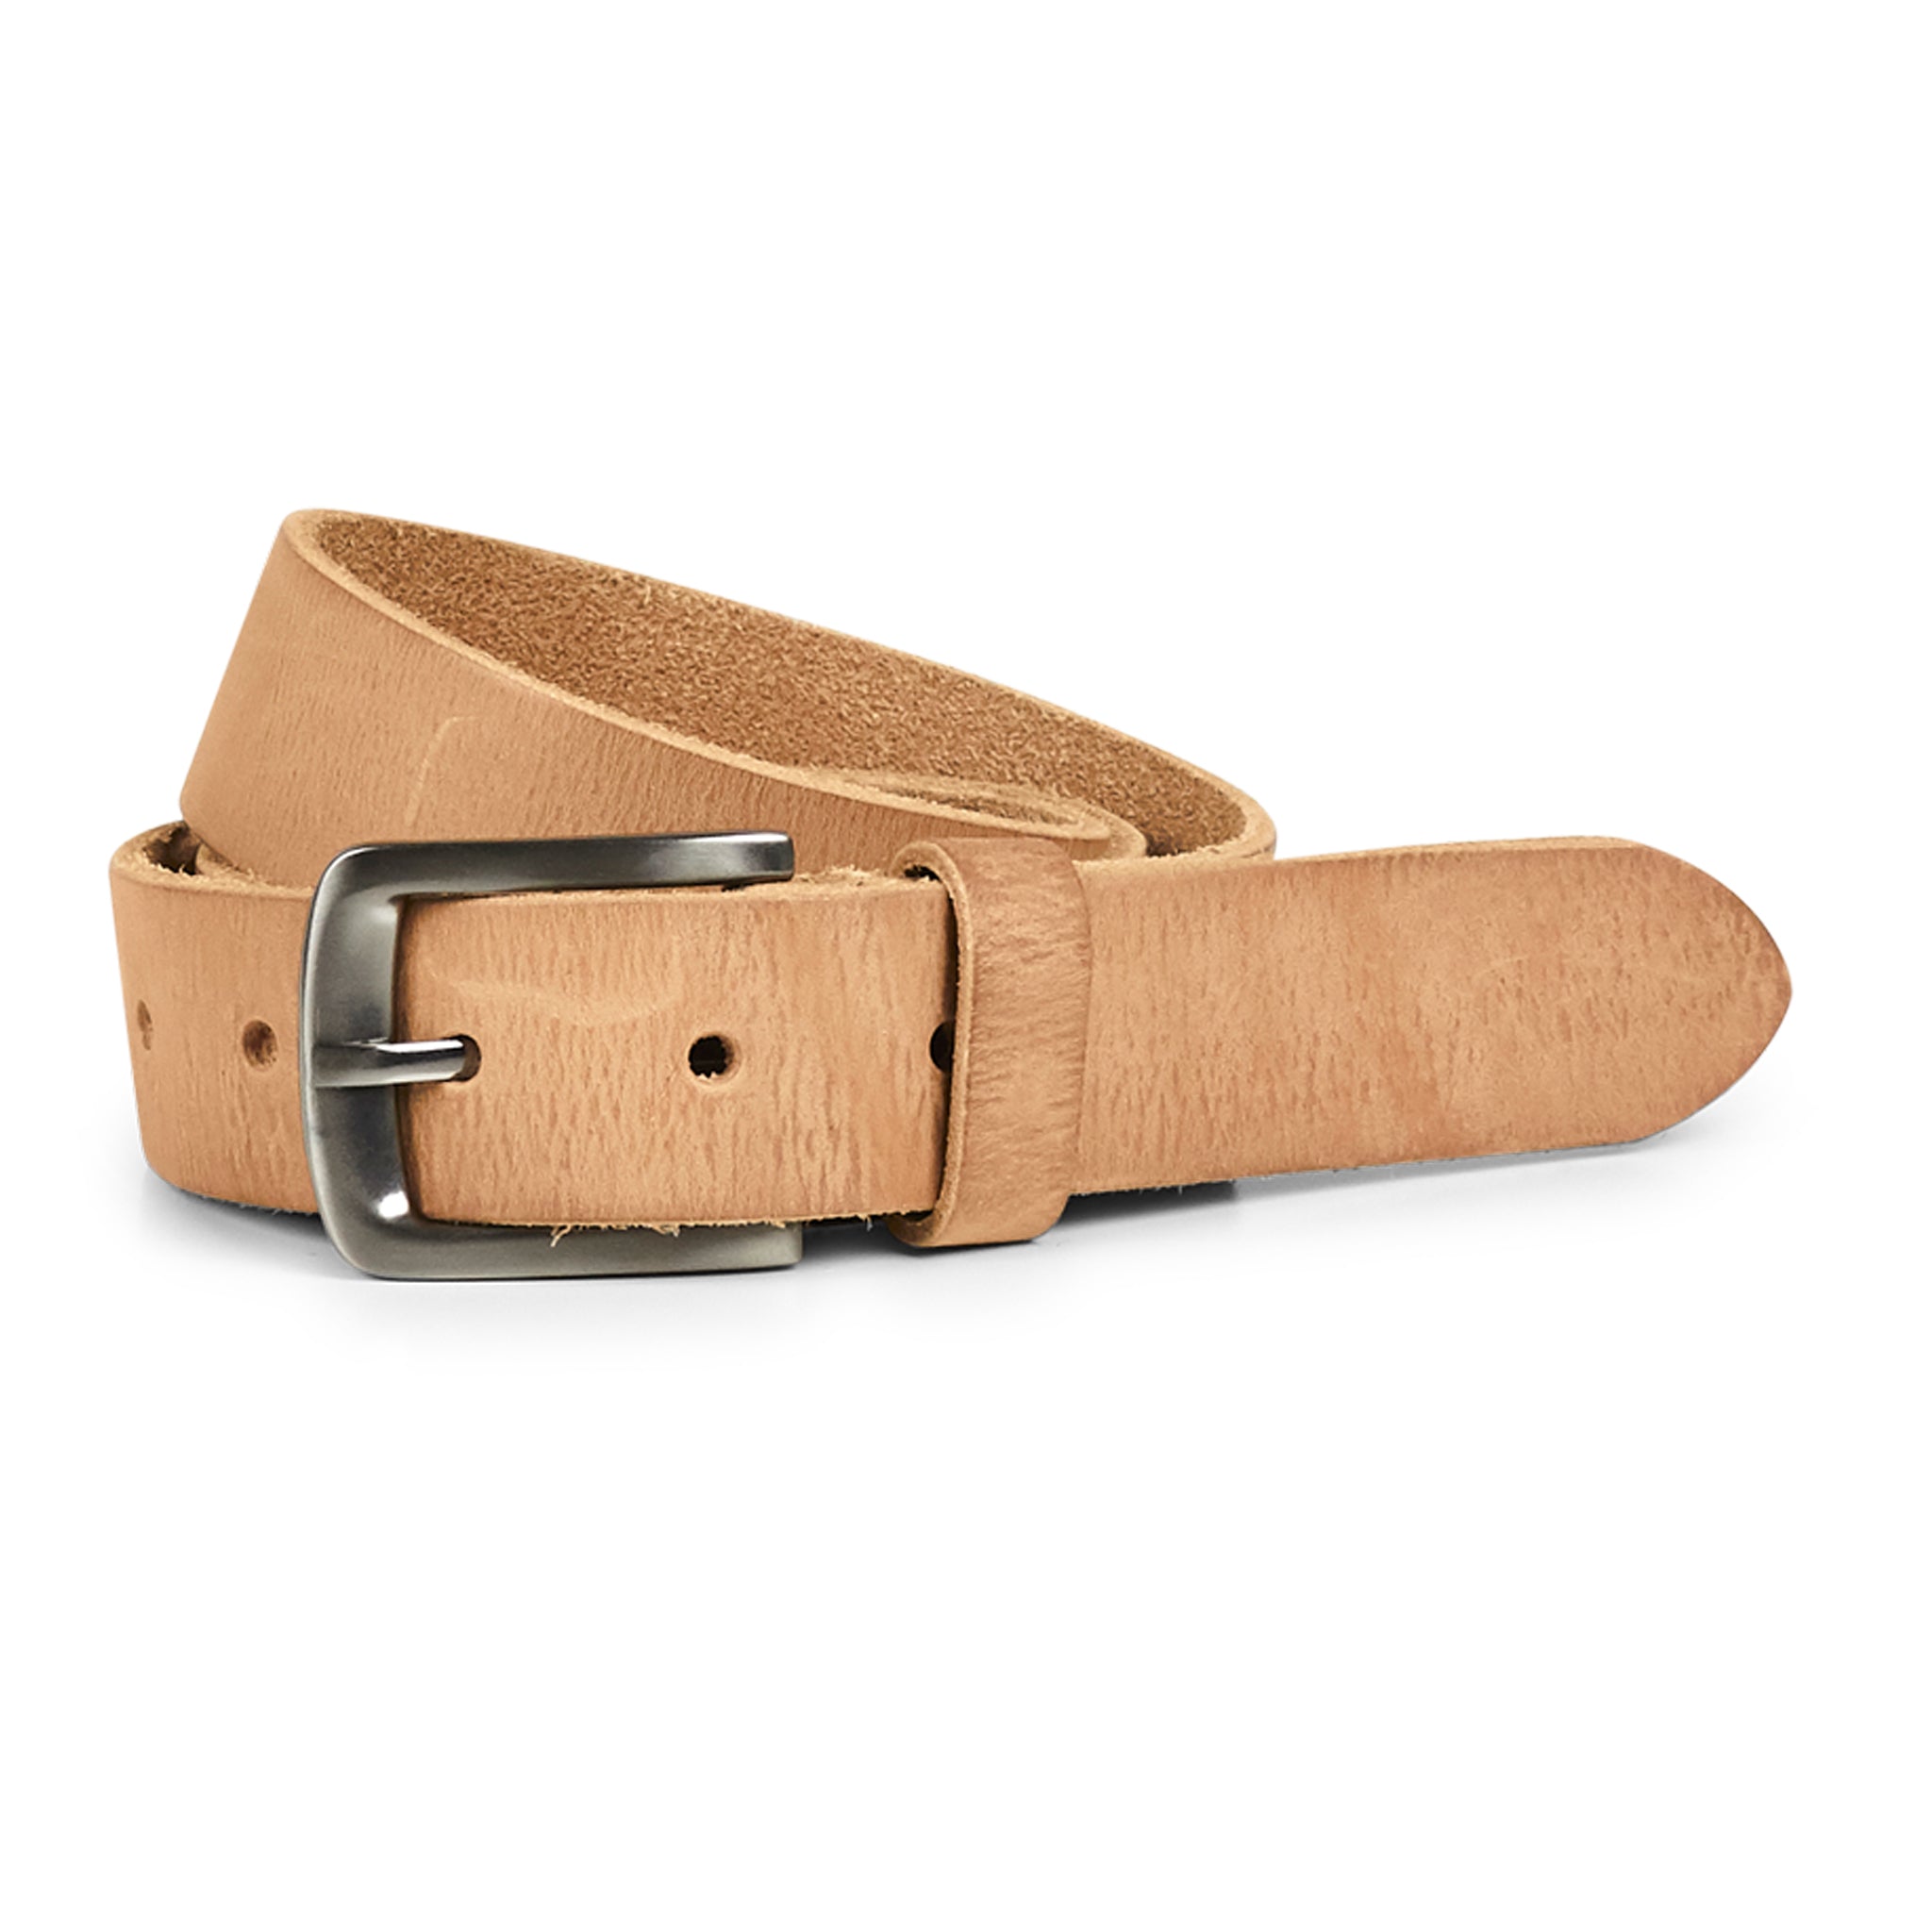 A distressed SharinMBG Belt - Camel by Markberg with a buckle on a white background.